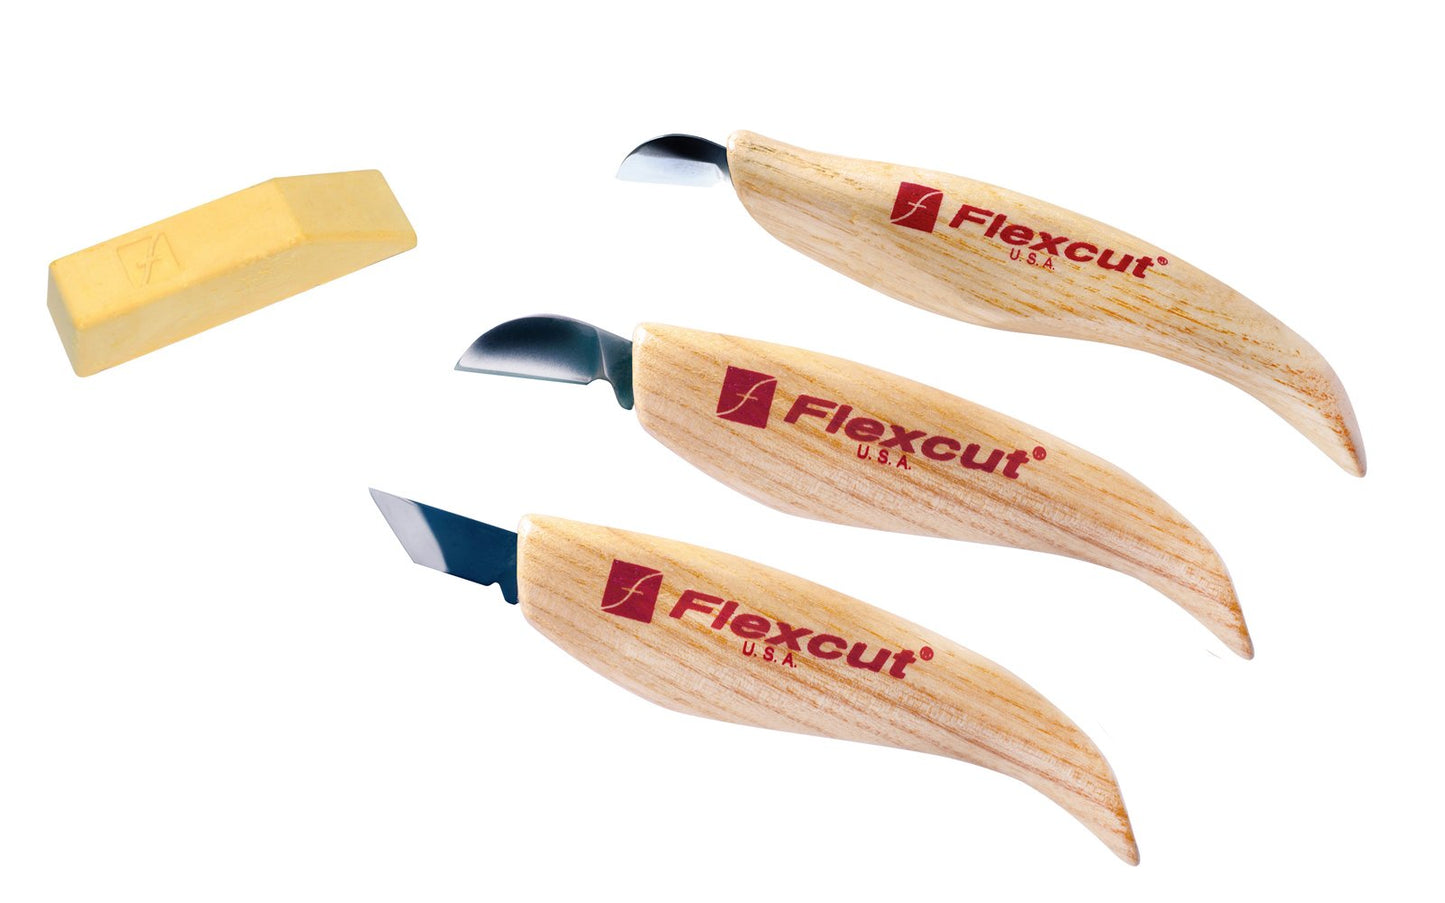 Flexcut 3-Knife Chip Carving Set ~ KN115 - KN11 Skew Knife,  KN15 Chip Carving Knife,  & KN20 Mini-Chip Carving Knife ~ High Carbon Spring Steel blades - Tempered to HRC 59-61 - Made in USA - Flexcut Three Piece Set ~ Flexcut 3-piece set - Chip Carving Set ~ 651646501156